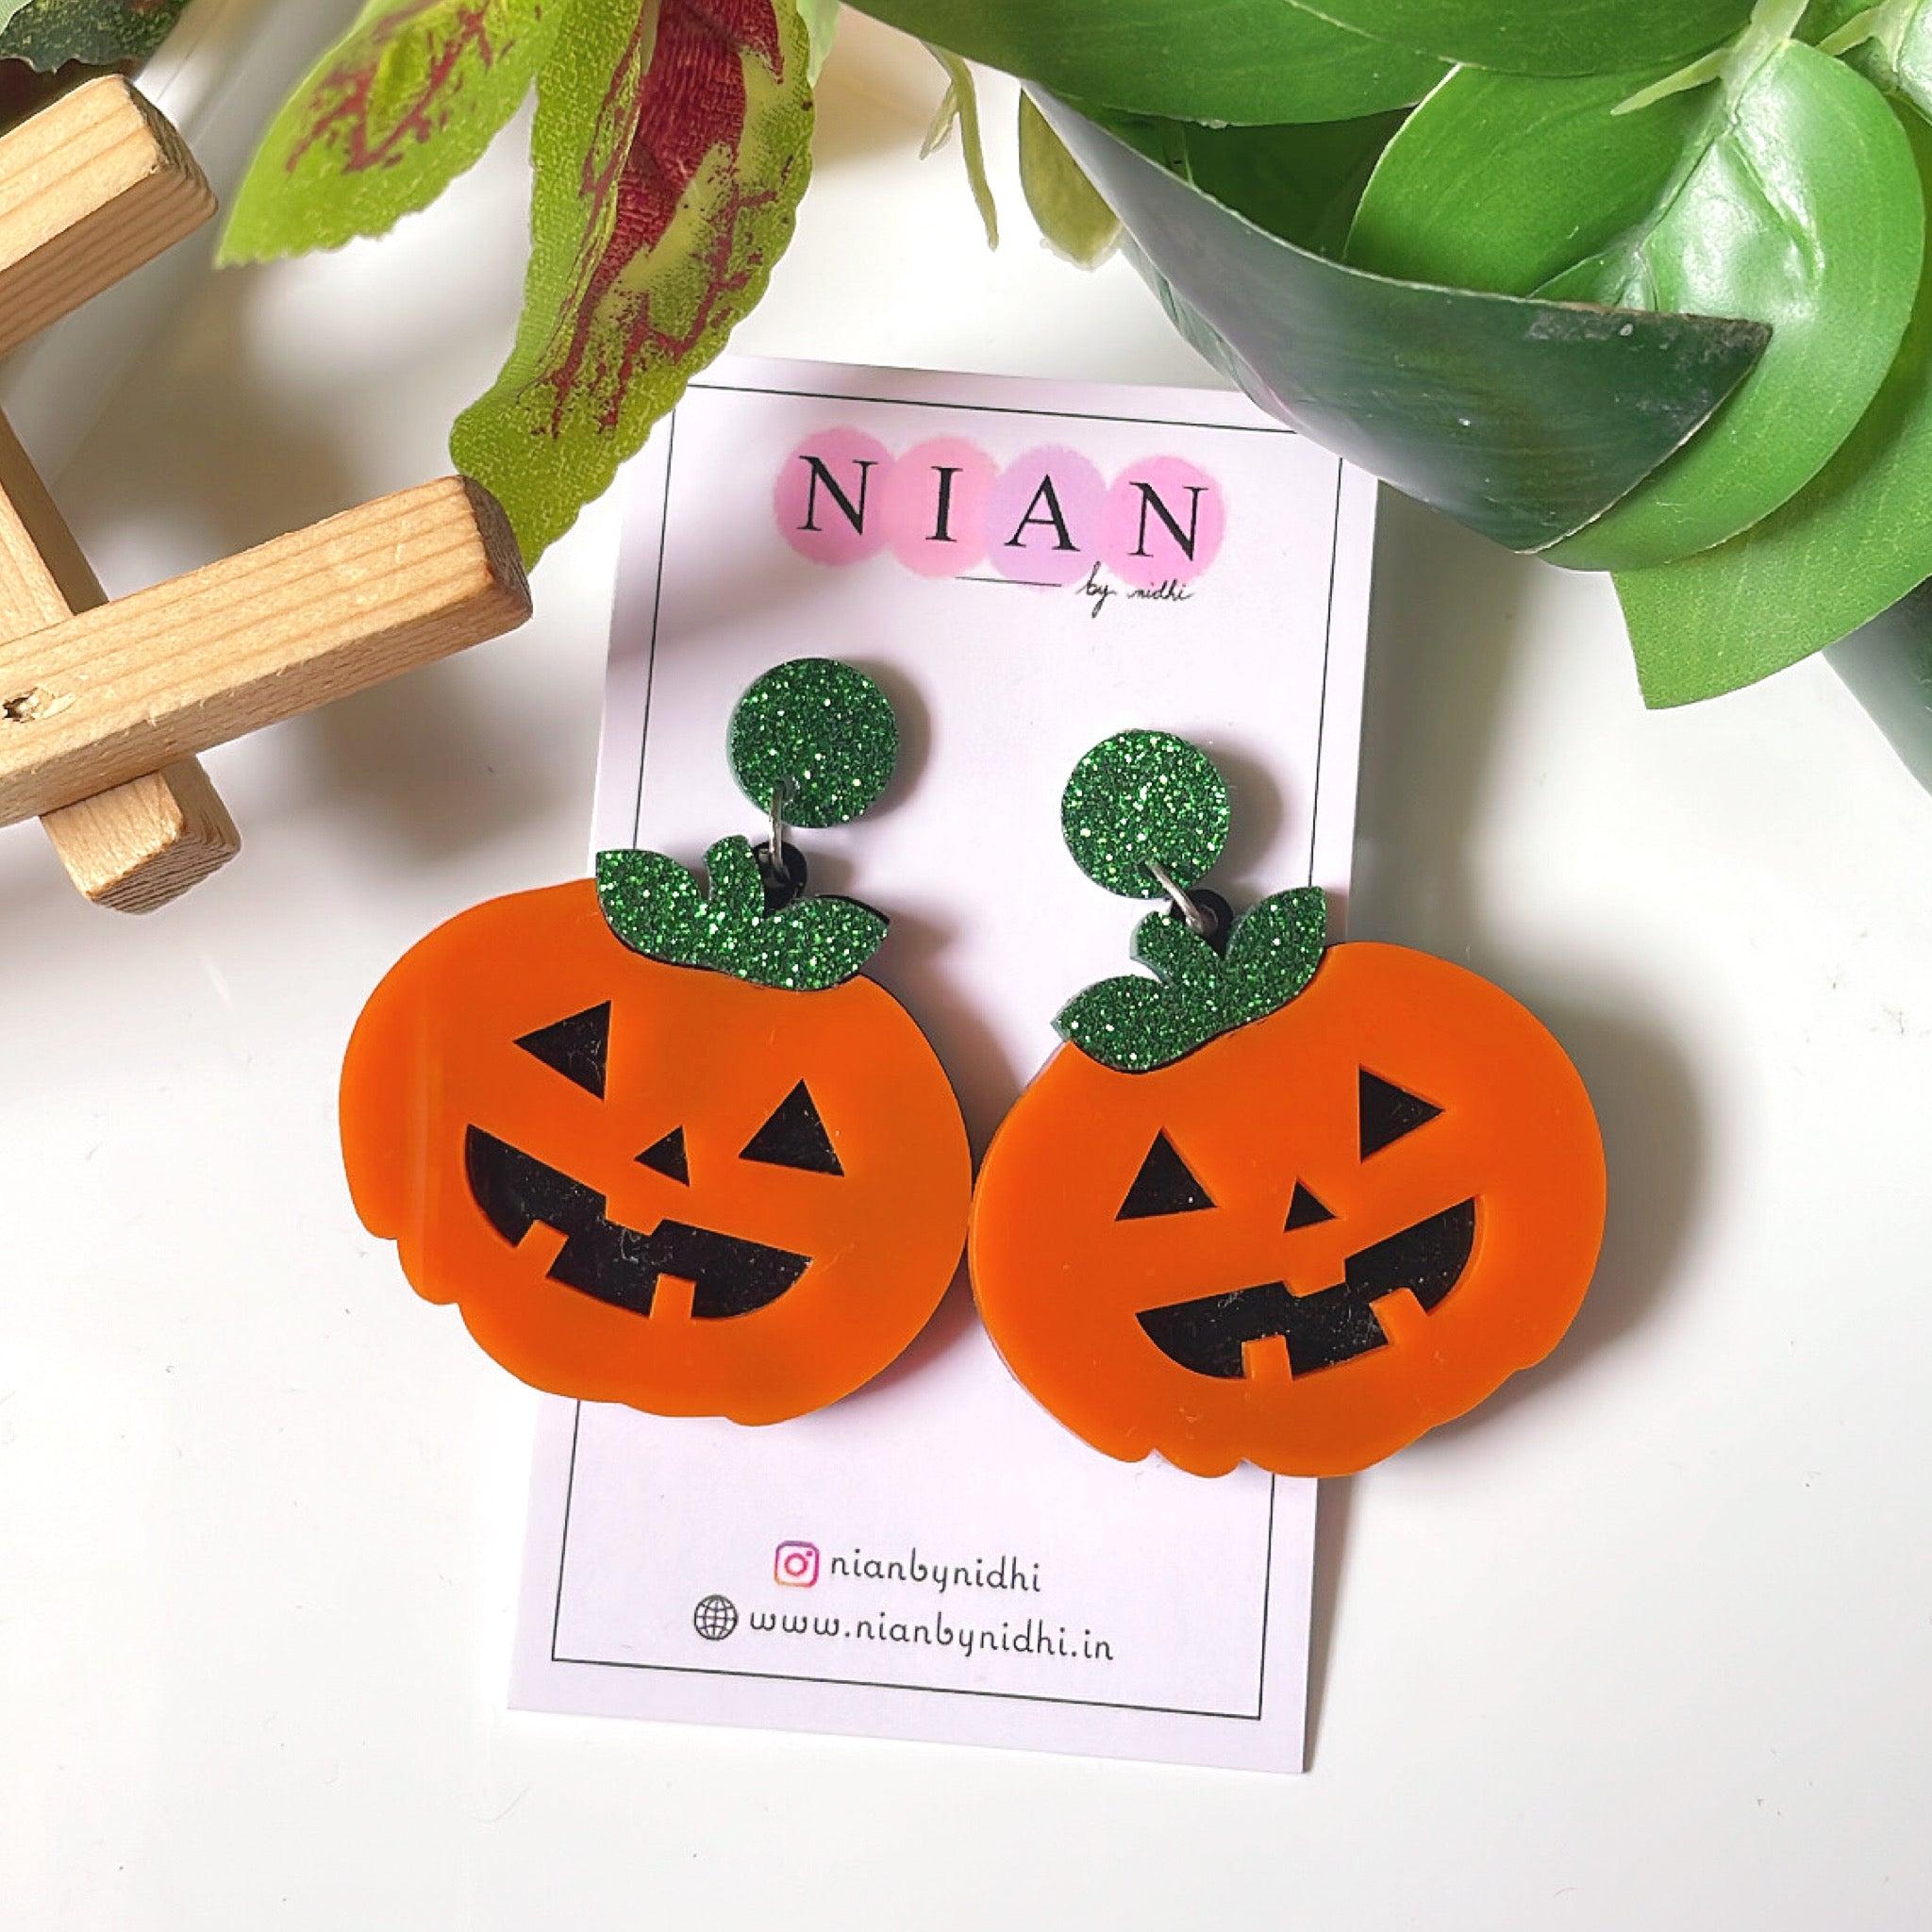 Plumpy Pumpkin Earrings - Orange, Black and Shimmer Green - Nian by Nidhi - placed in a white and green background